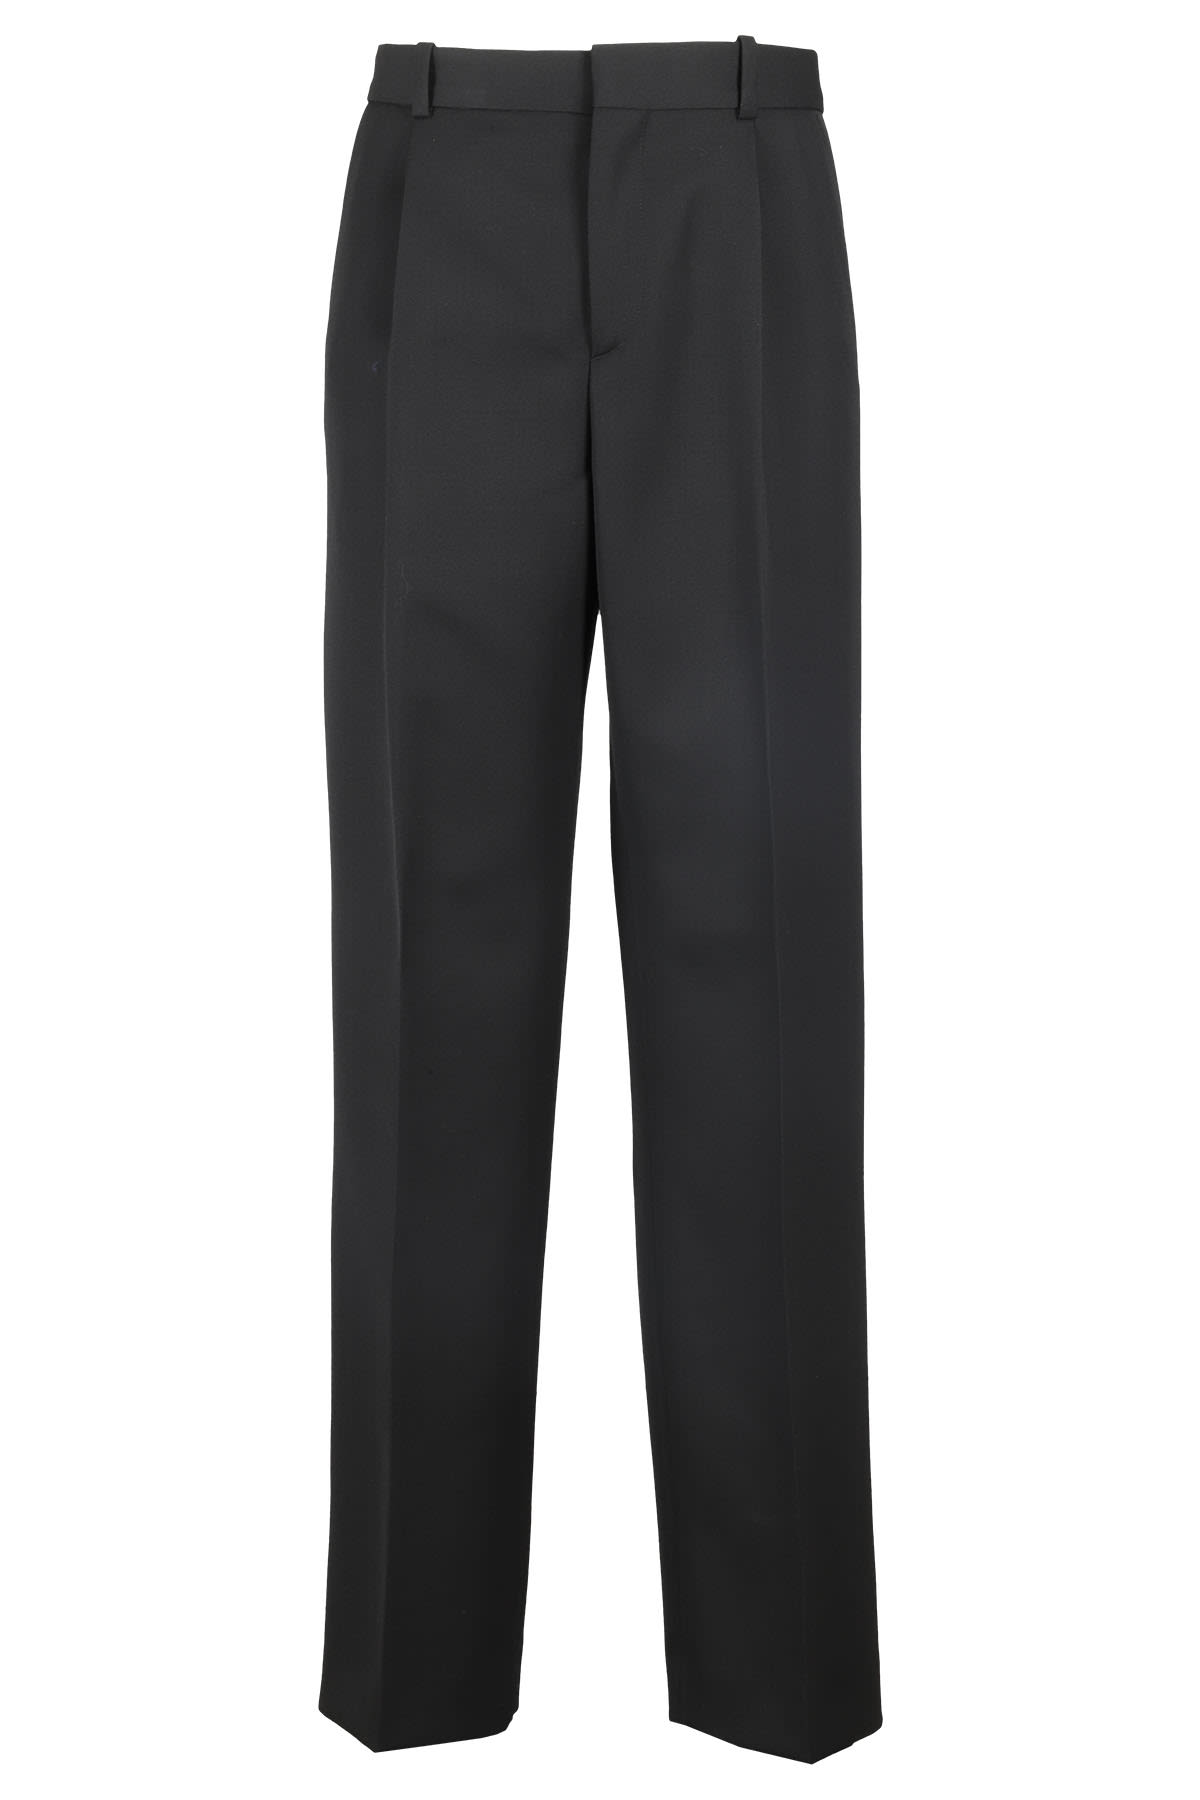 BOTTER CLASSIC TROUSERS WITH PLEAT